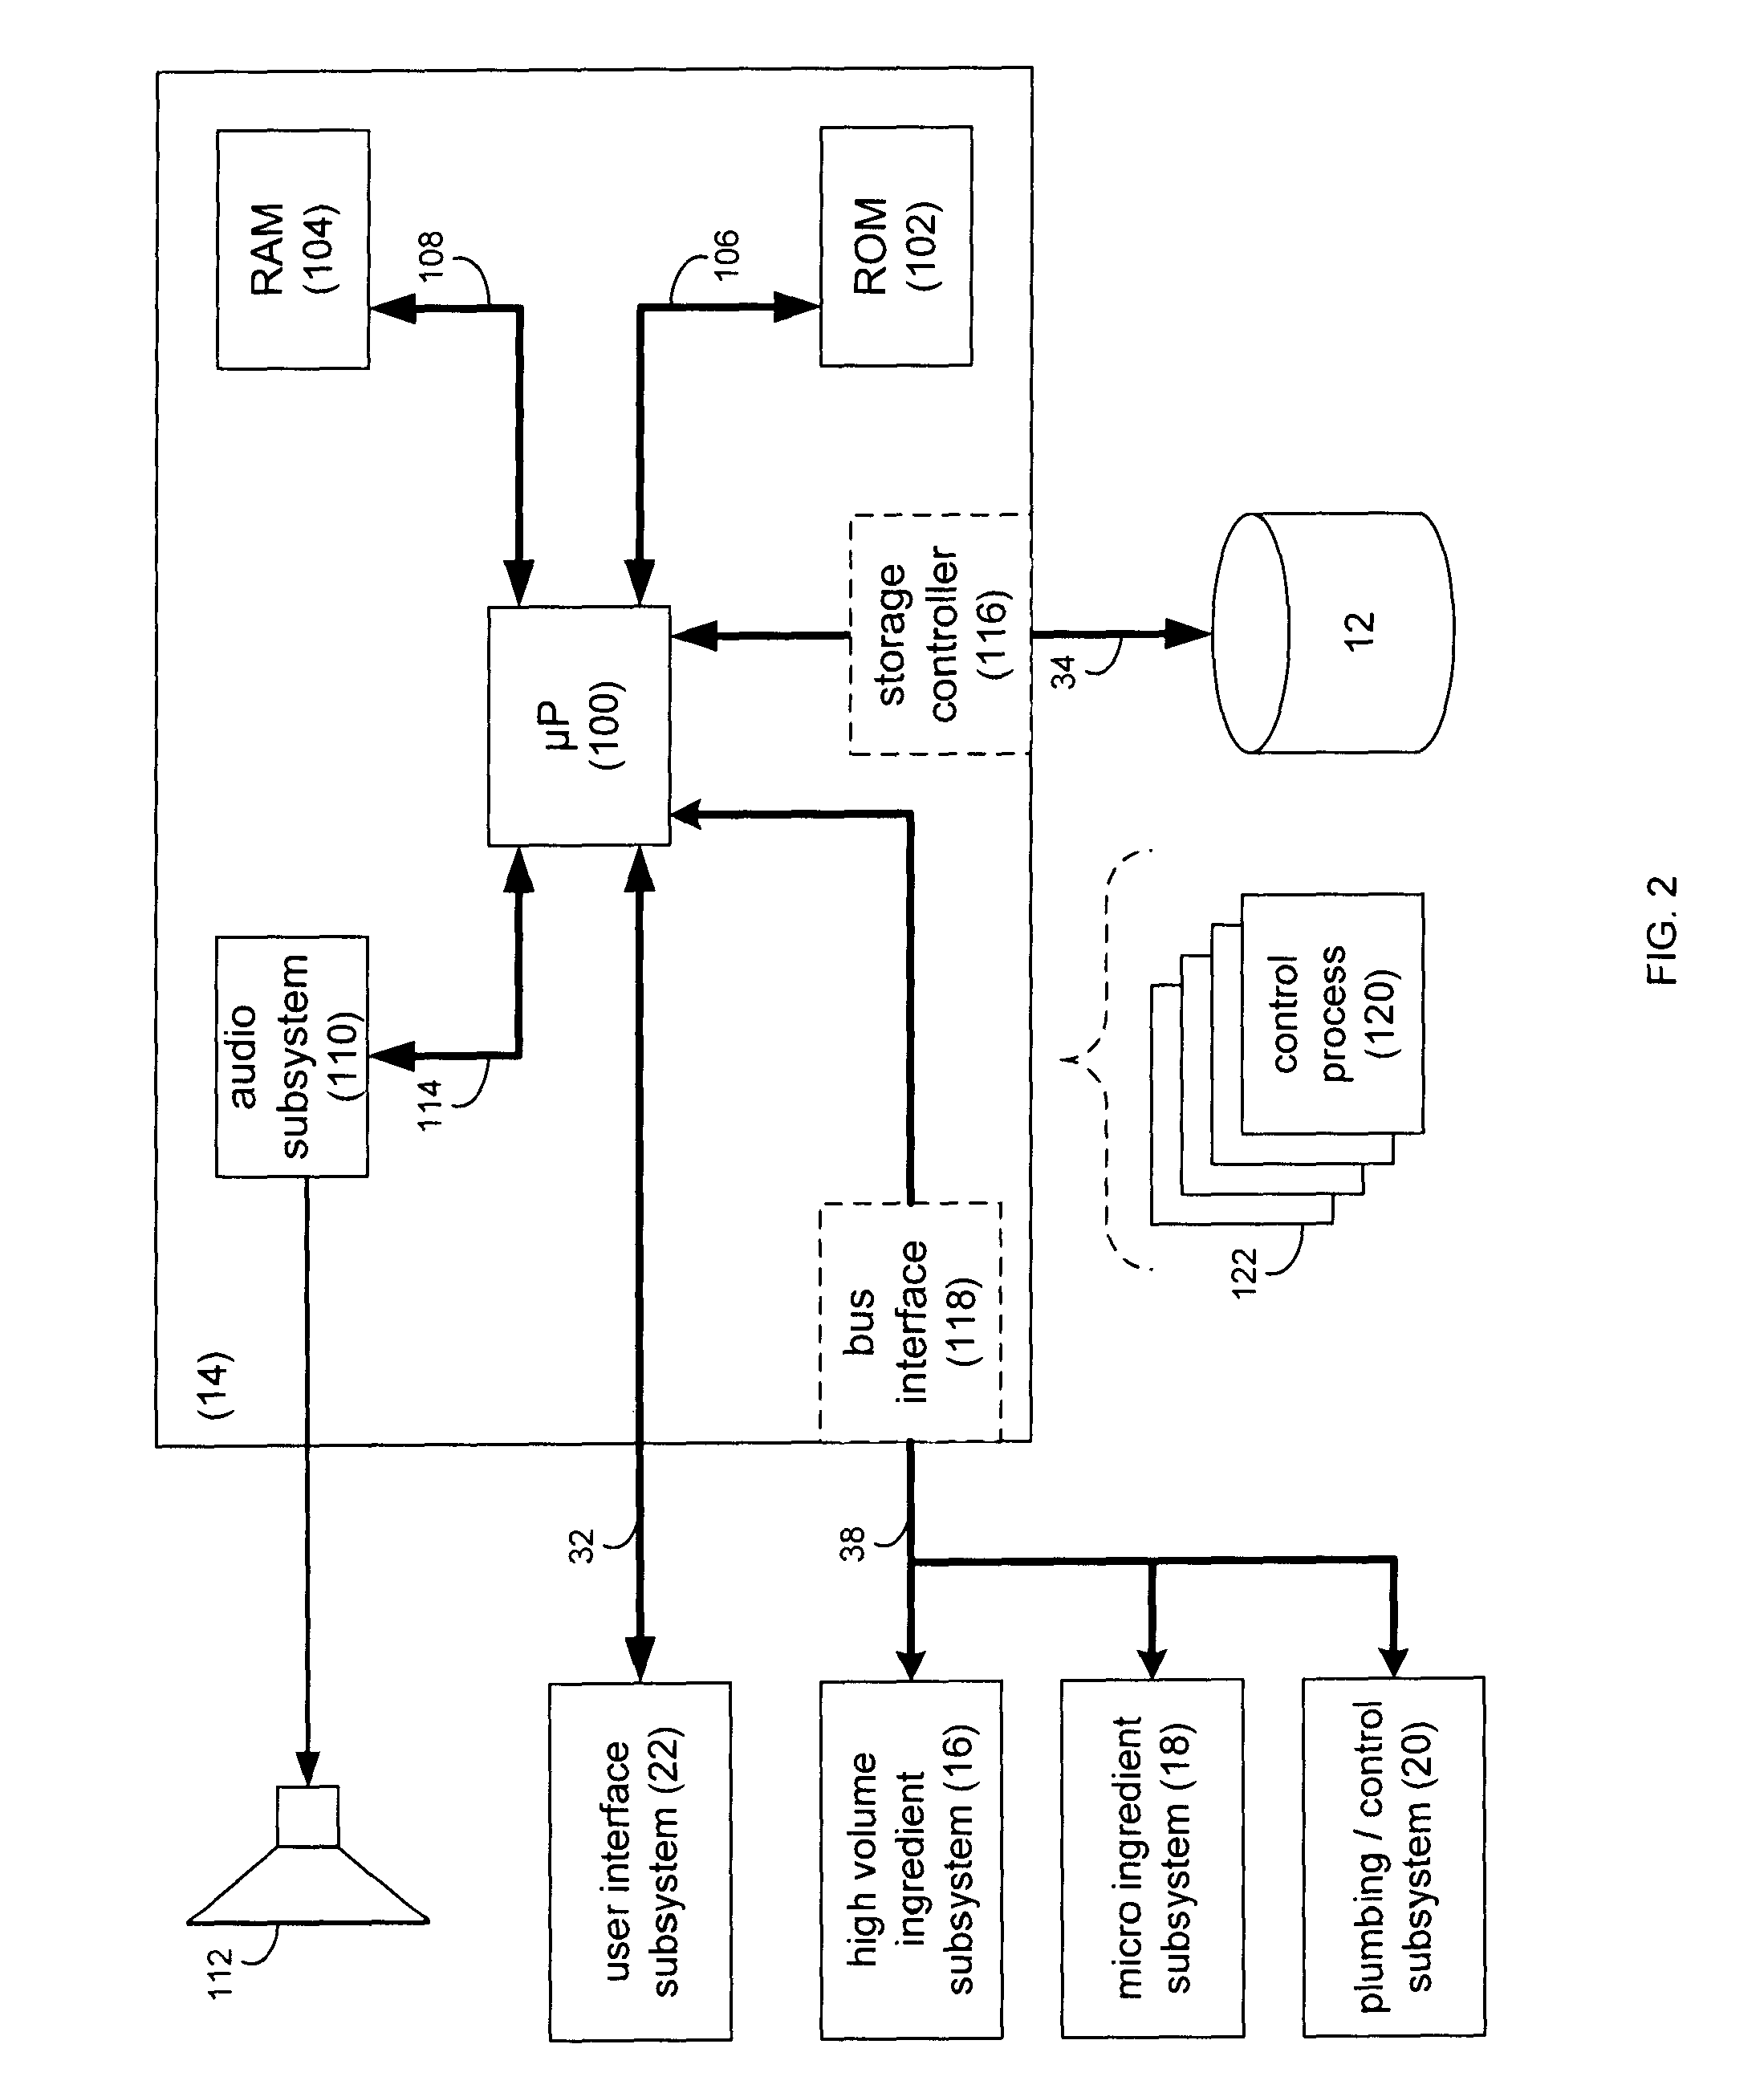 System and method for generating a drive signal